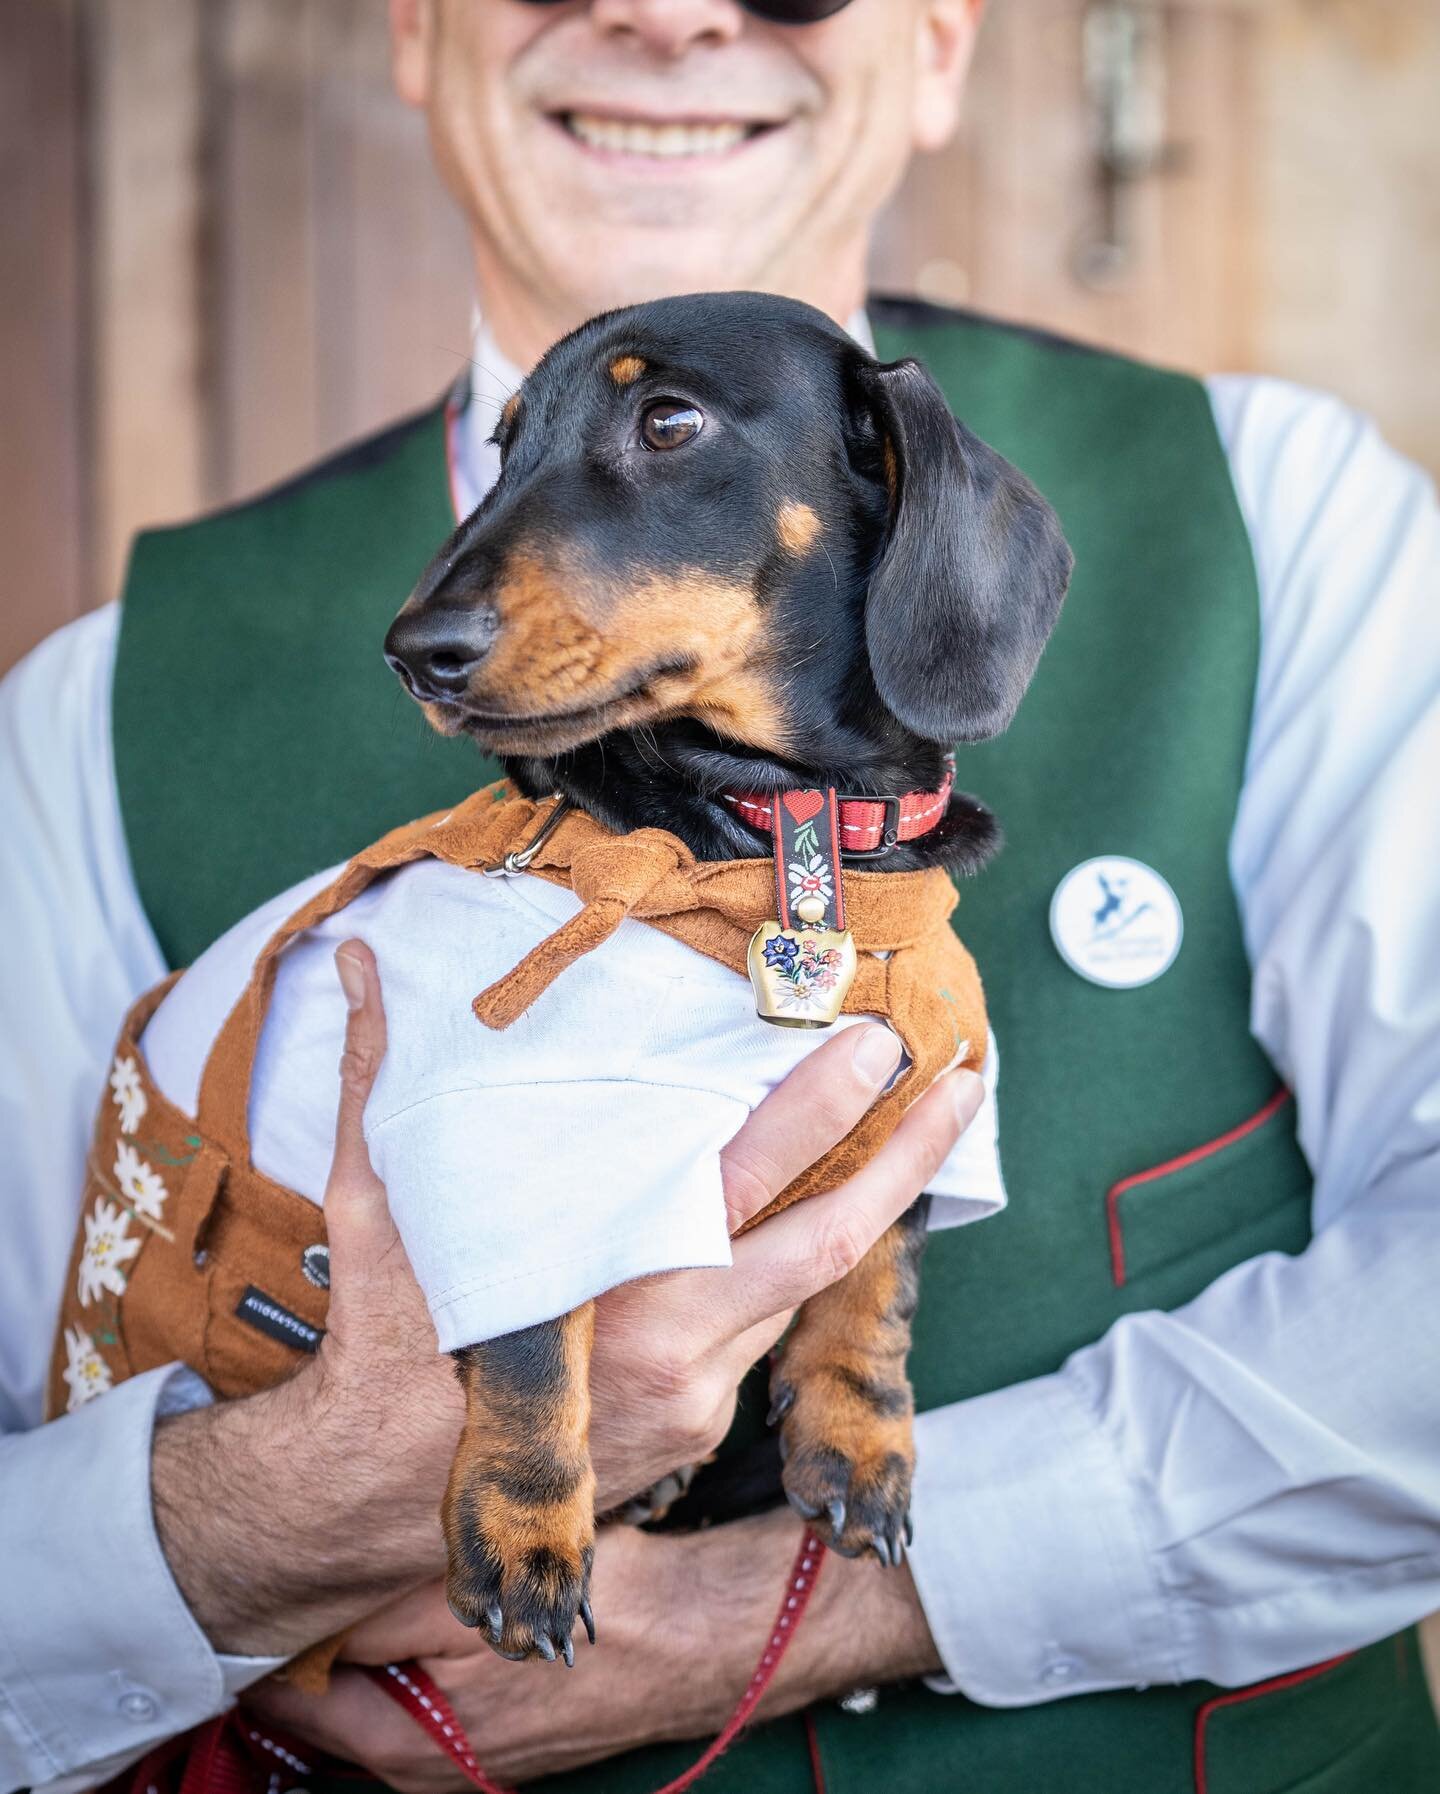 Have you ever seen such a well-dressed pup? 😆

Our lovely performers @heidihermanaccordion and their gorgeous puppy @hugo_of_hahndorf were at the Inn over the weekend!

If you&rsquo;re looking to bring your furry friend to the Hahndorf Inn, we have 